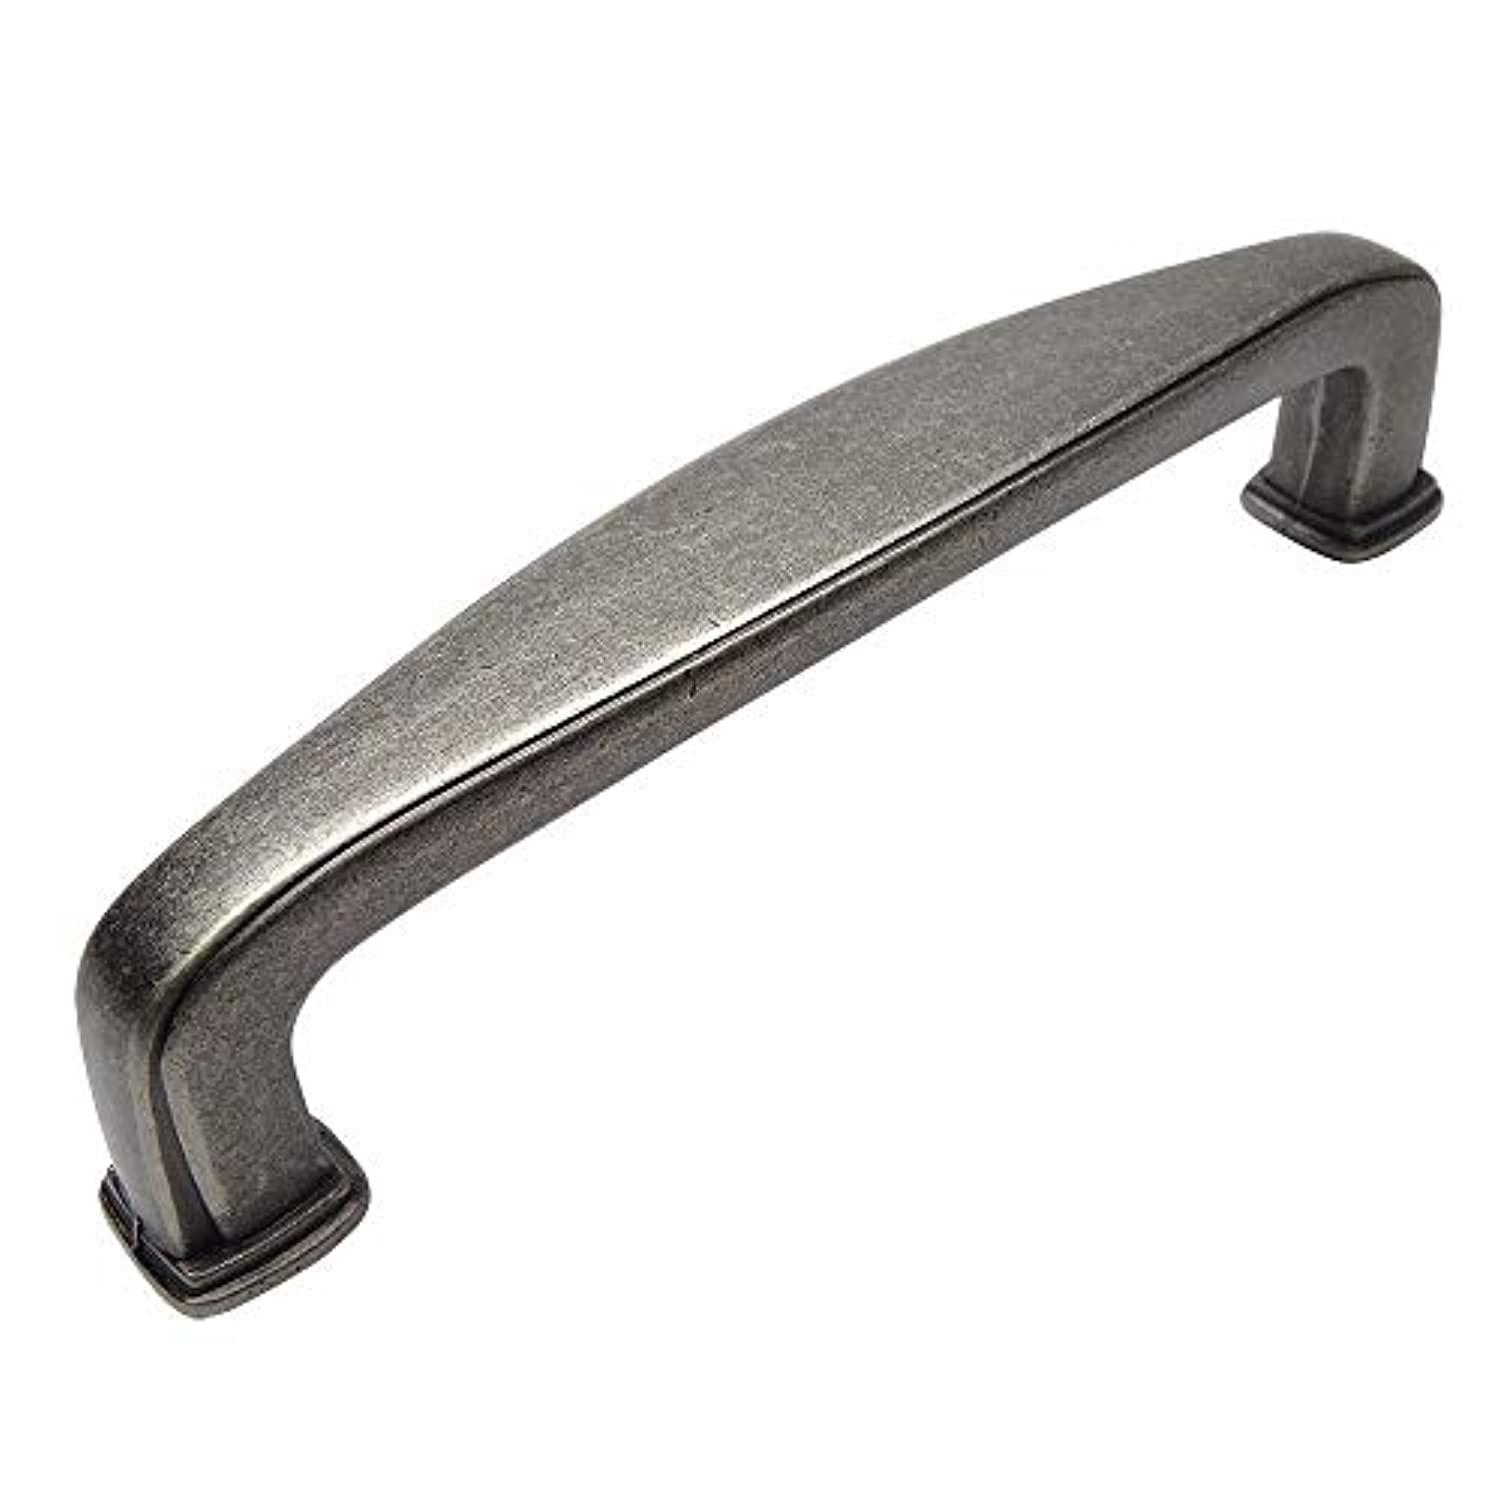 COSMAS 10 pack - cosmas 4390wn weathered nickel modern cabinet hardware handle pull - 3-1/2" inch (89mm) hole centers